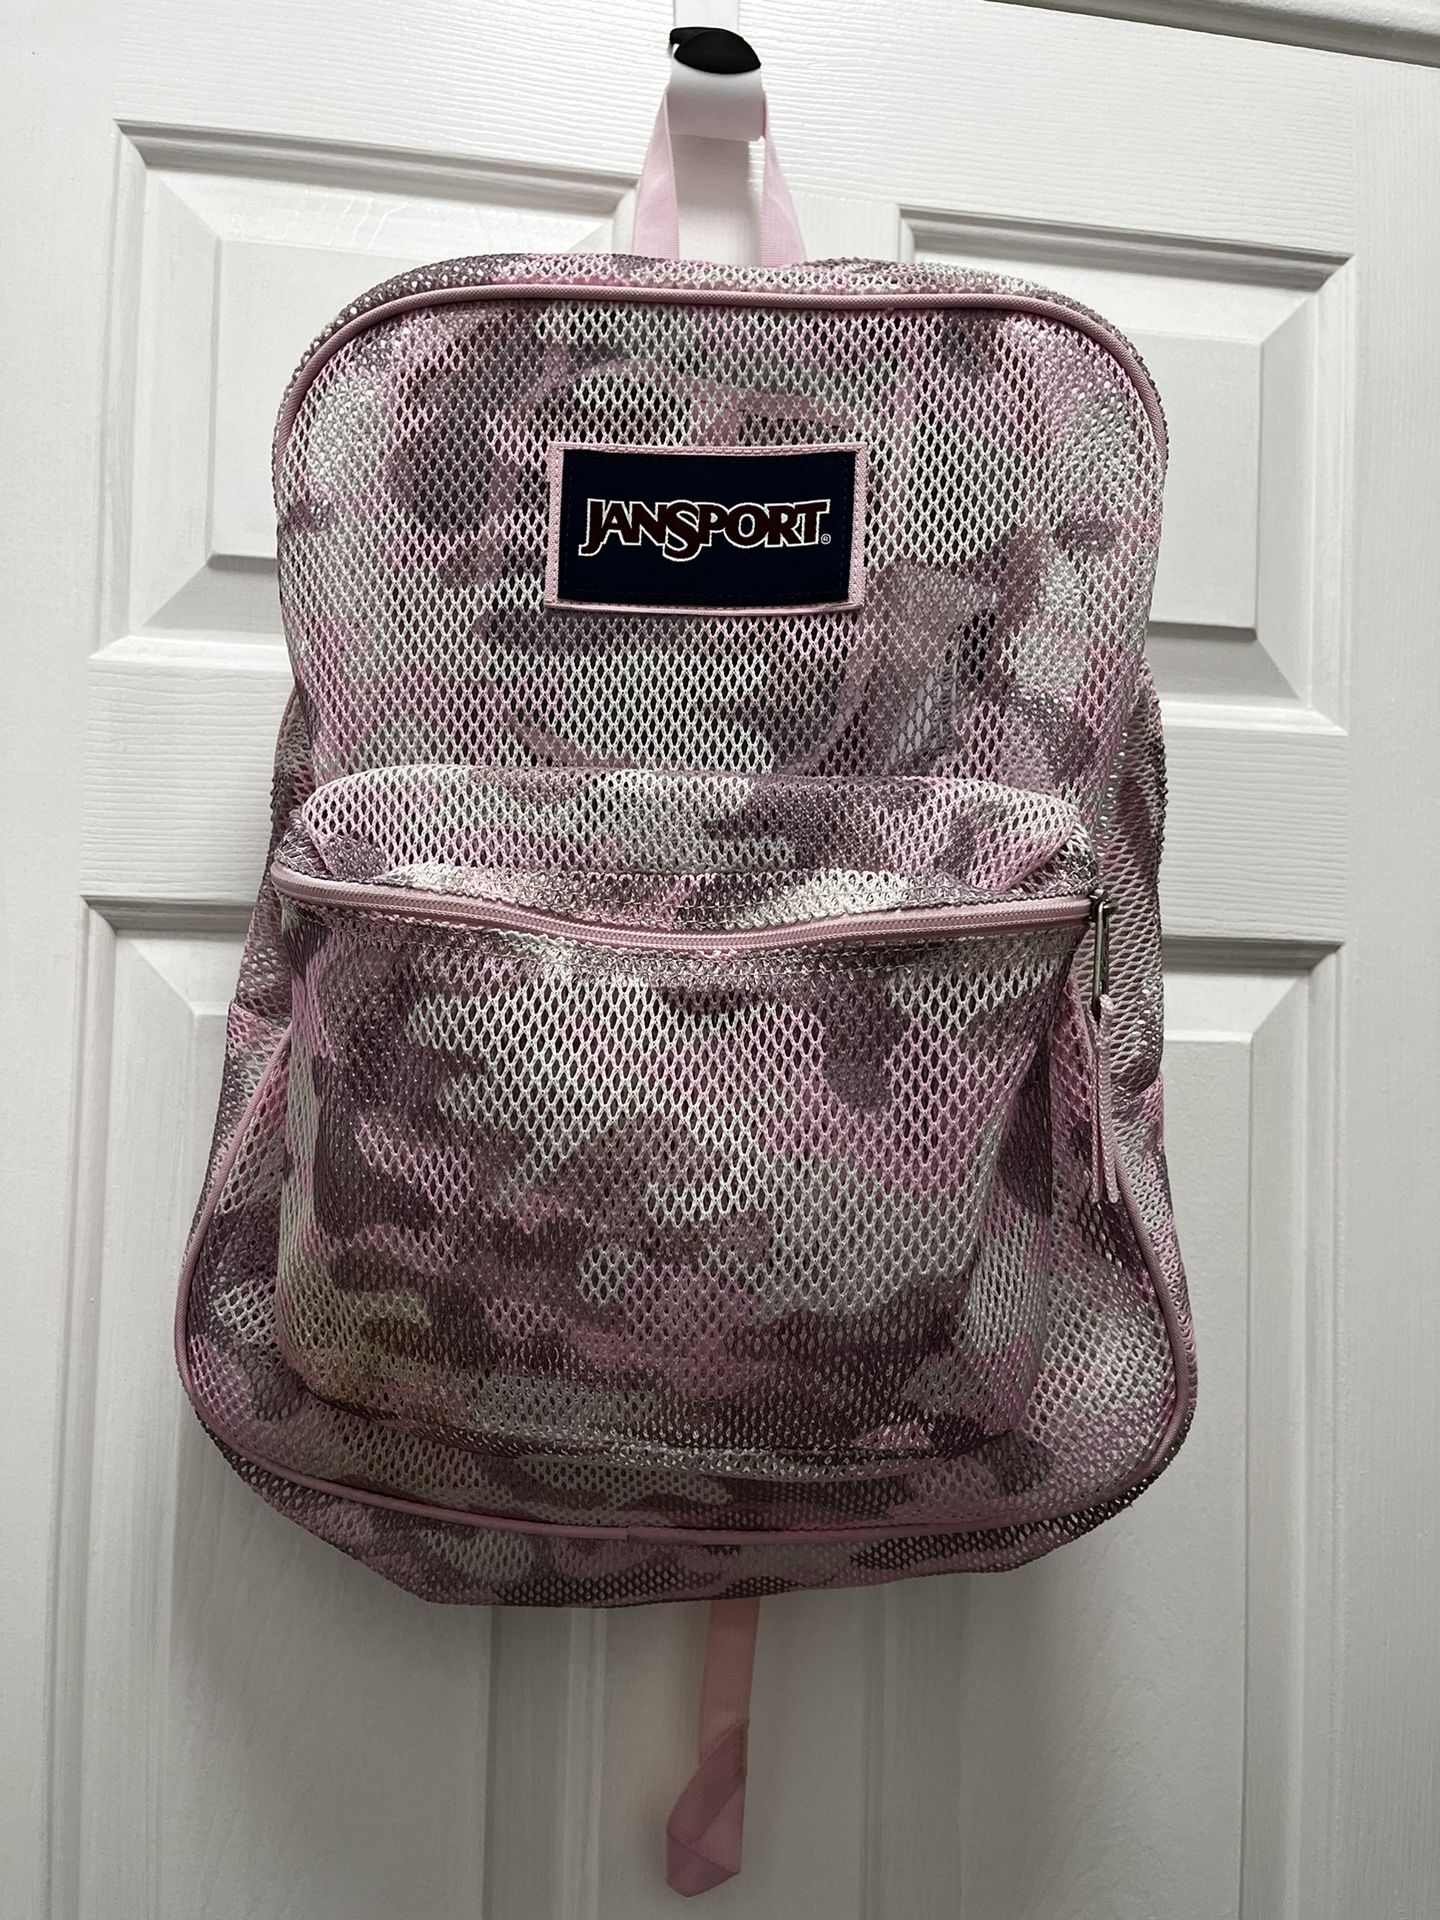 Jansport All Mesh Cotton Candy Camo Backpack